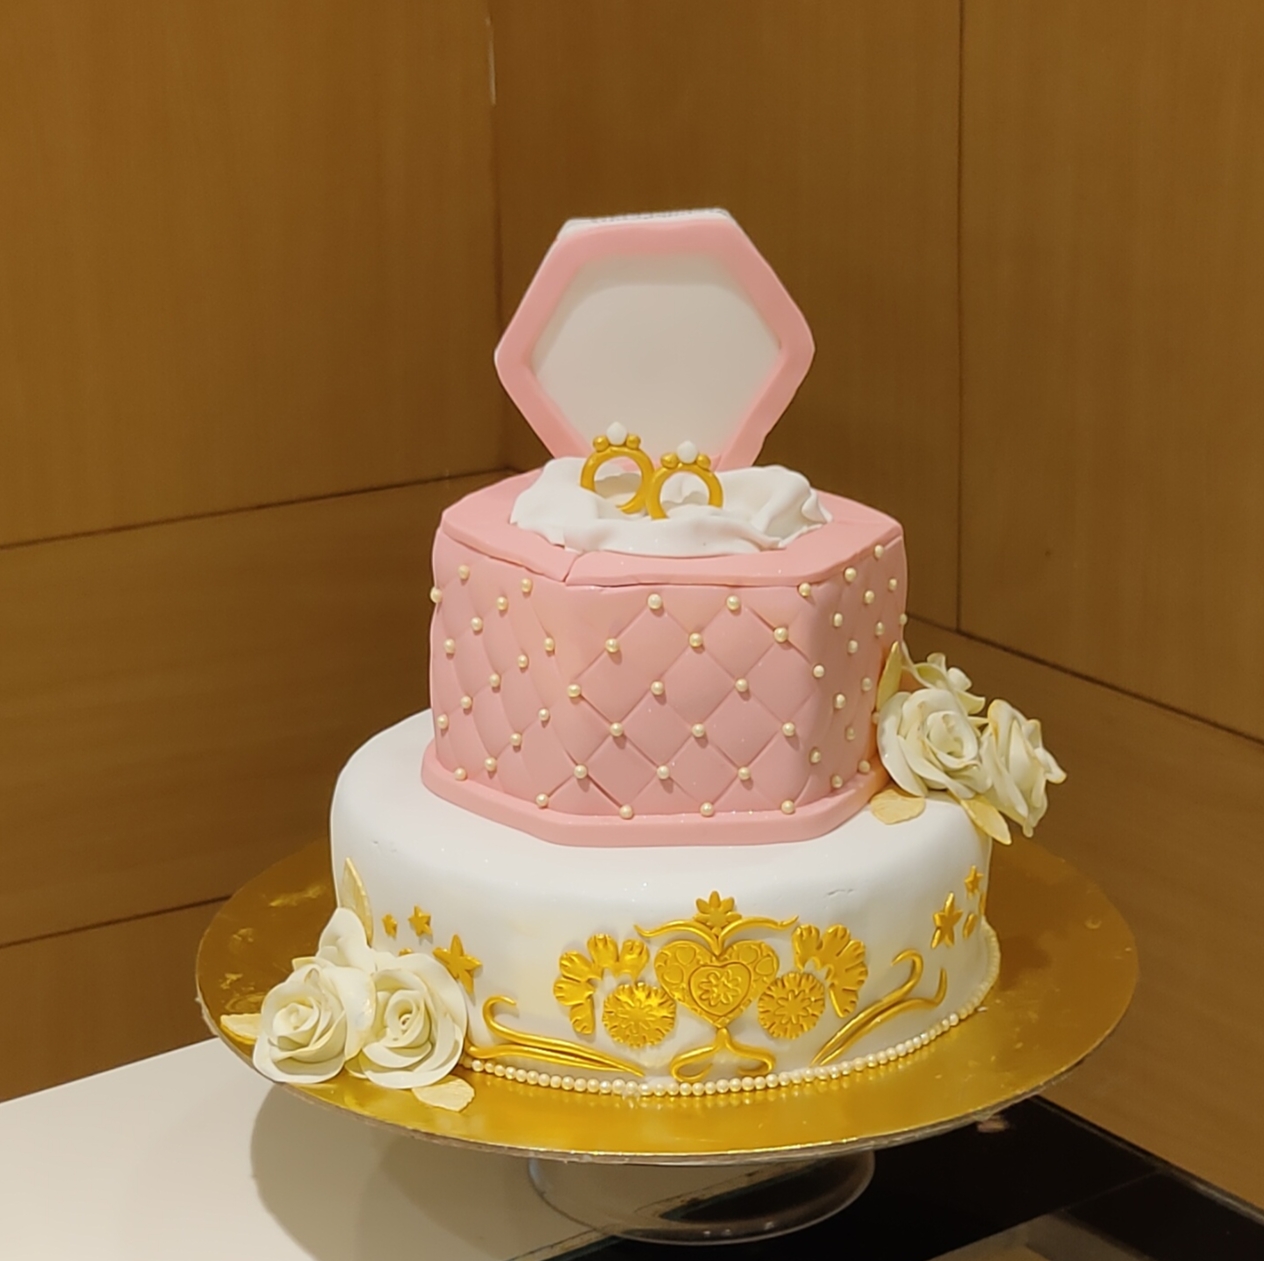 Engagement Cakes - The Good Egg